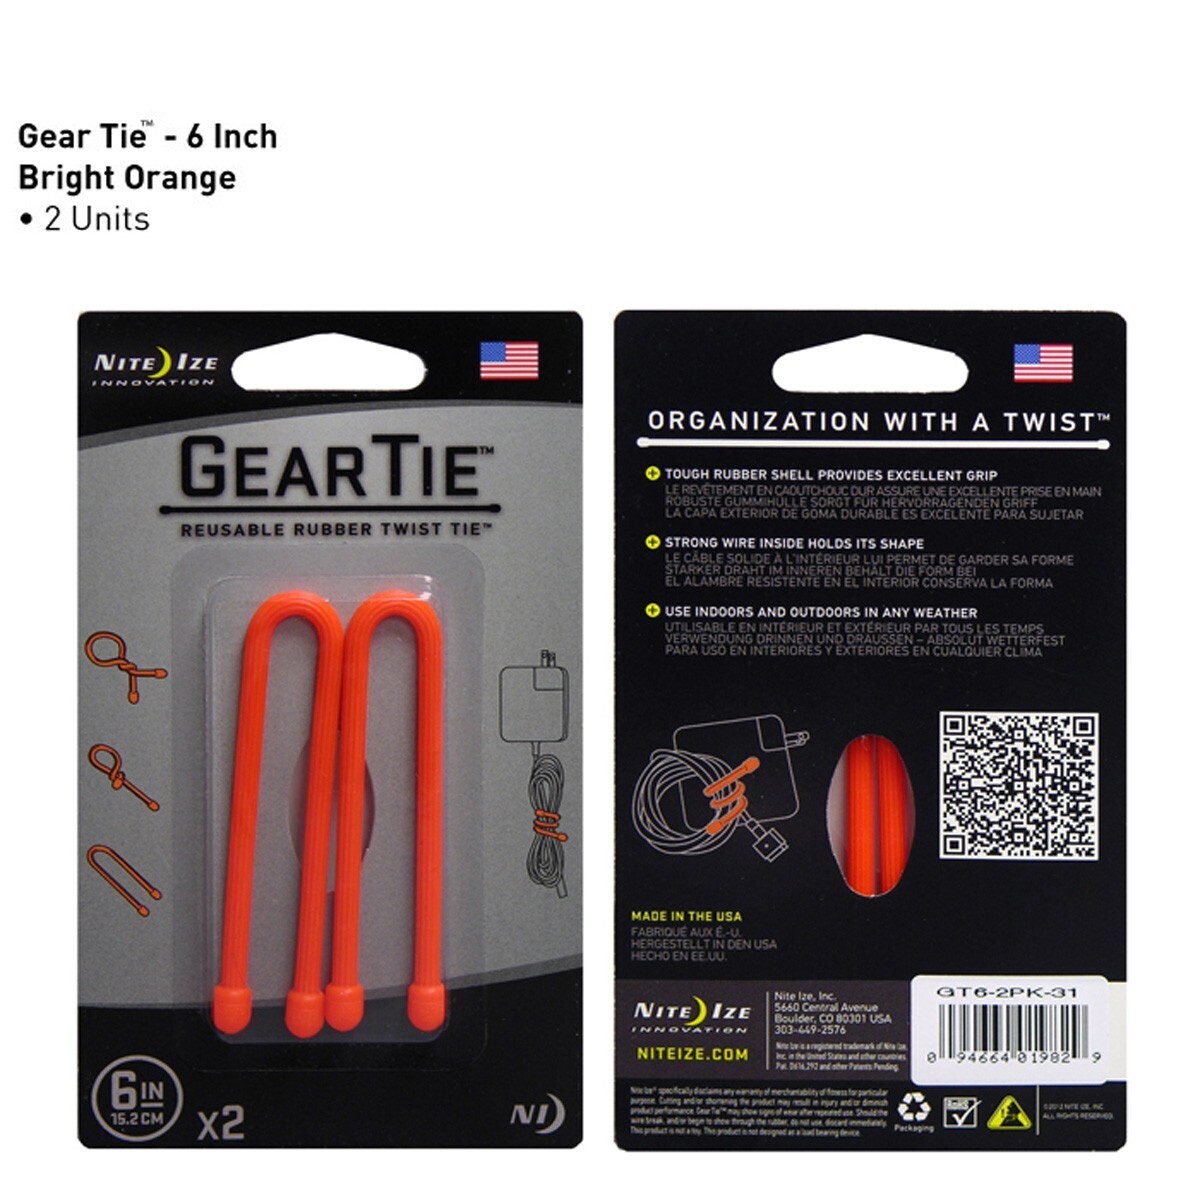 Set of Two GT6-2PK-01 Reusable Rubber Twist Tie 6" overall. Nite Ize Gear Tie 